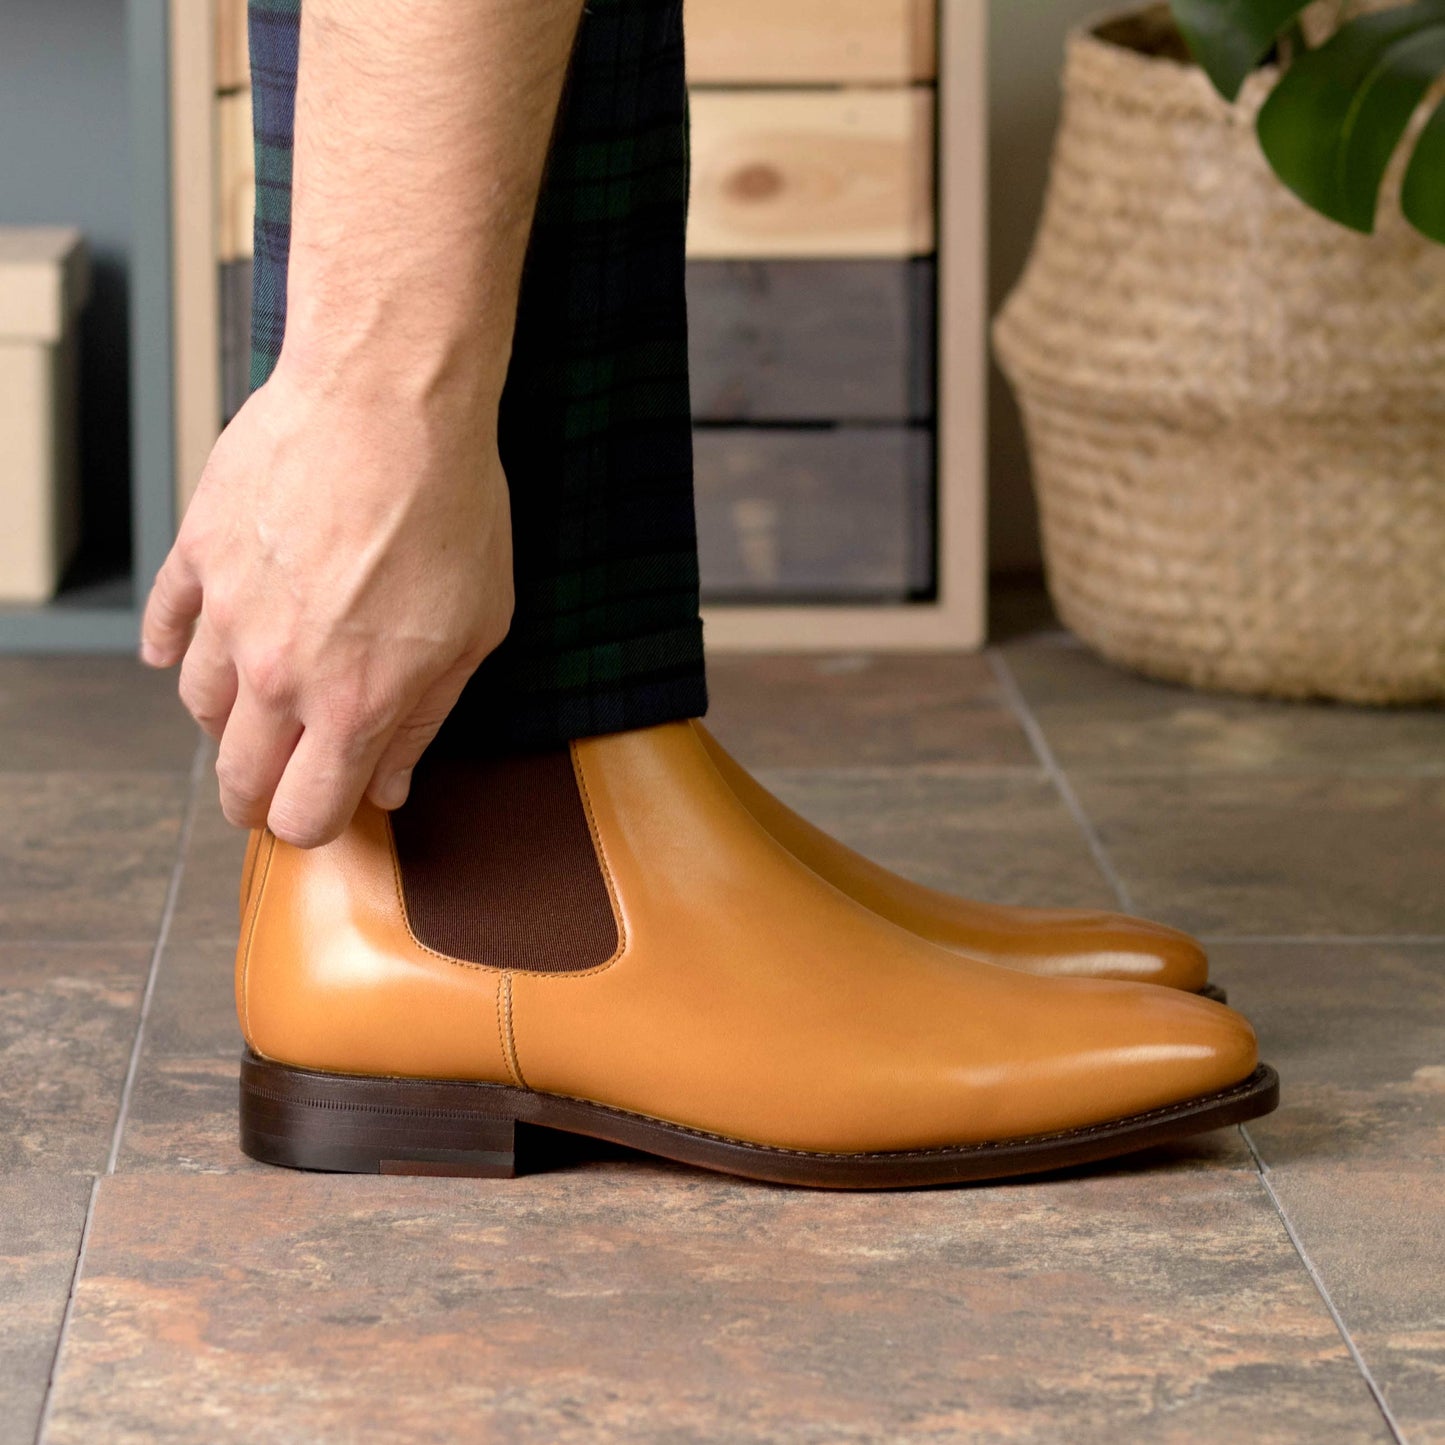 Chelsea Boots - orange Goodyear Welt leather sole